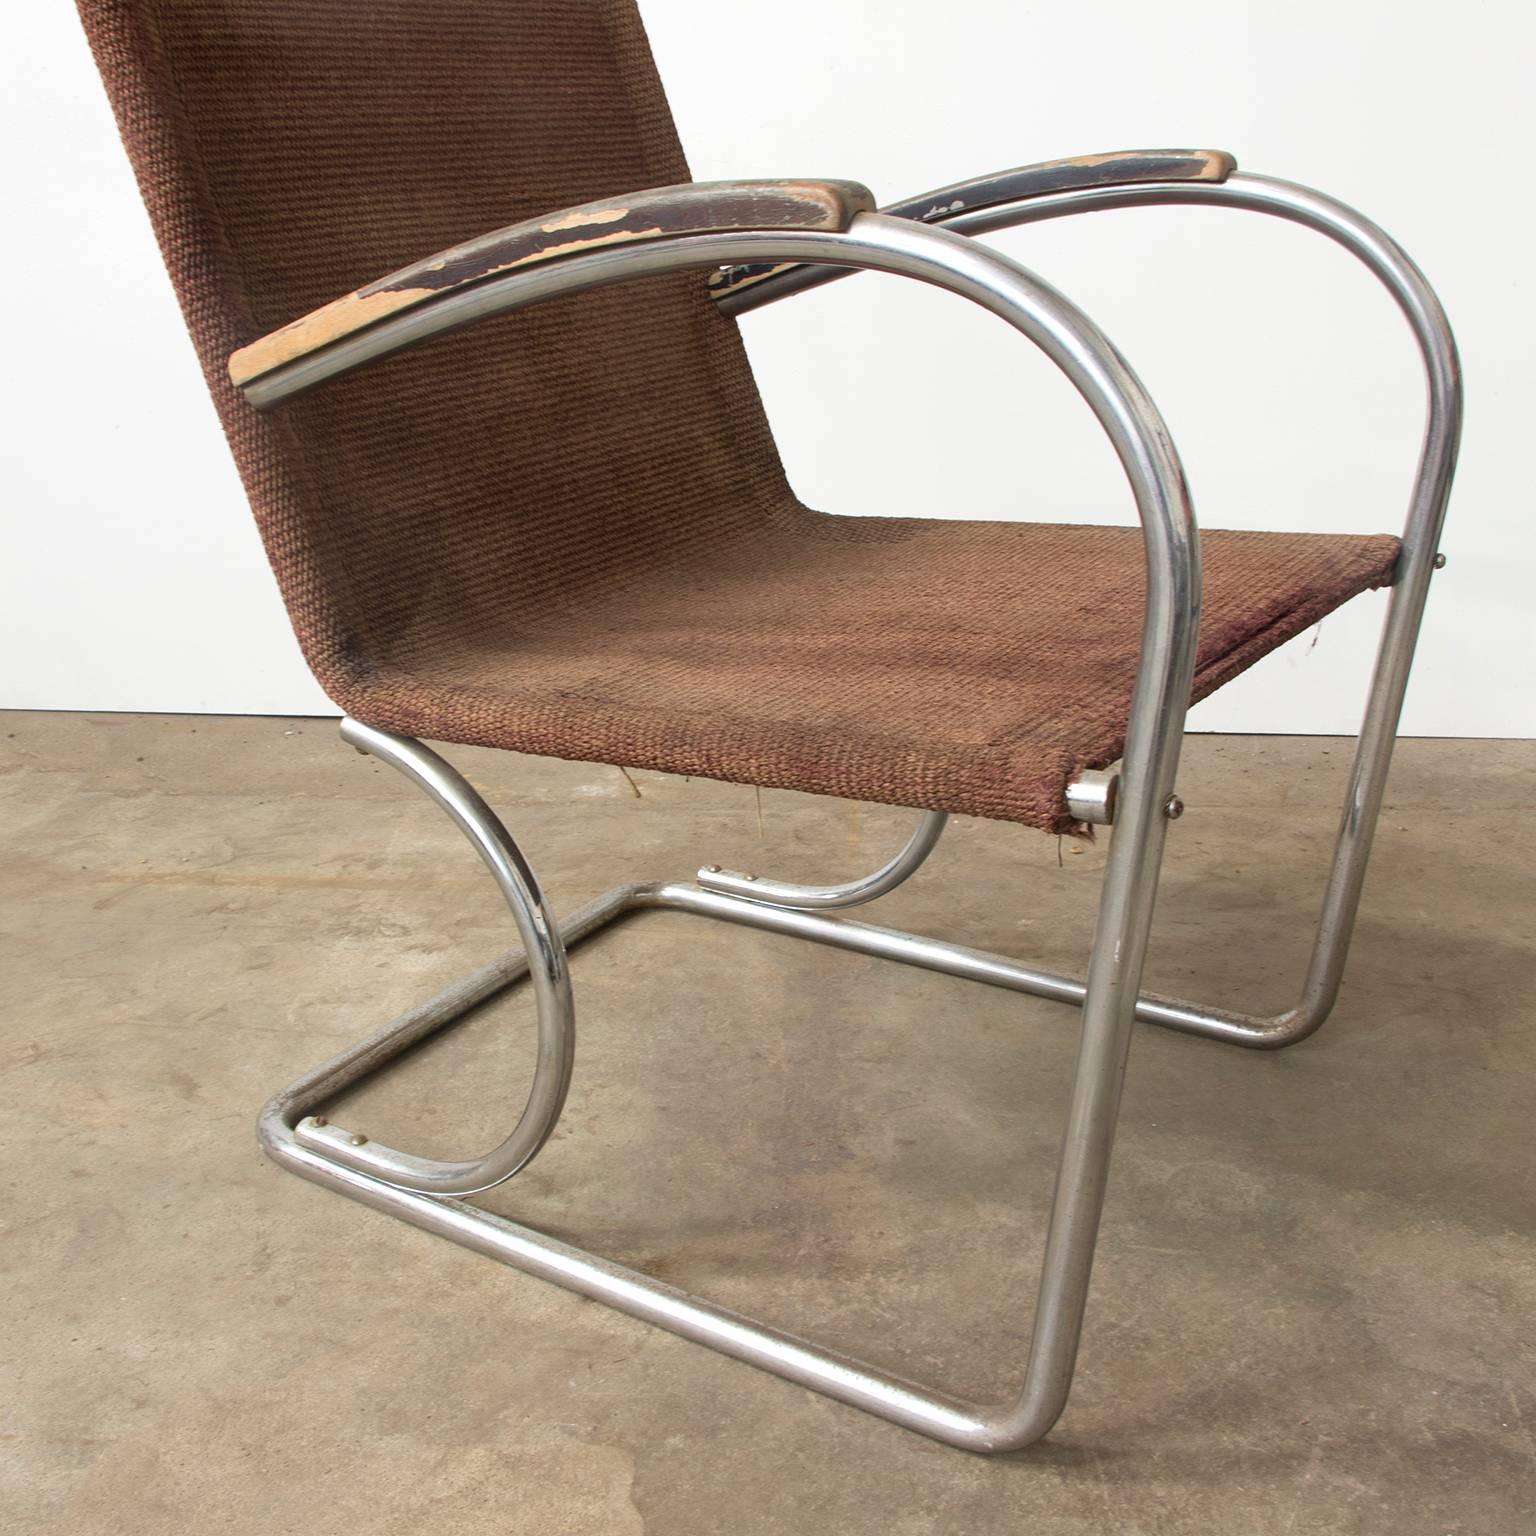 Rope Circa 1930, Original, Early Tubular Easy Chair with Original Robe Woven Seat For Sale